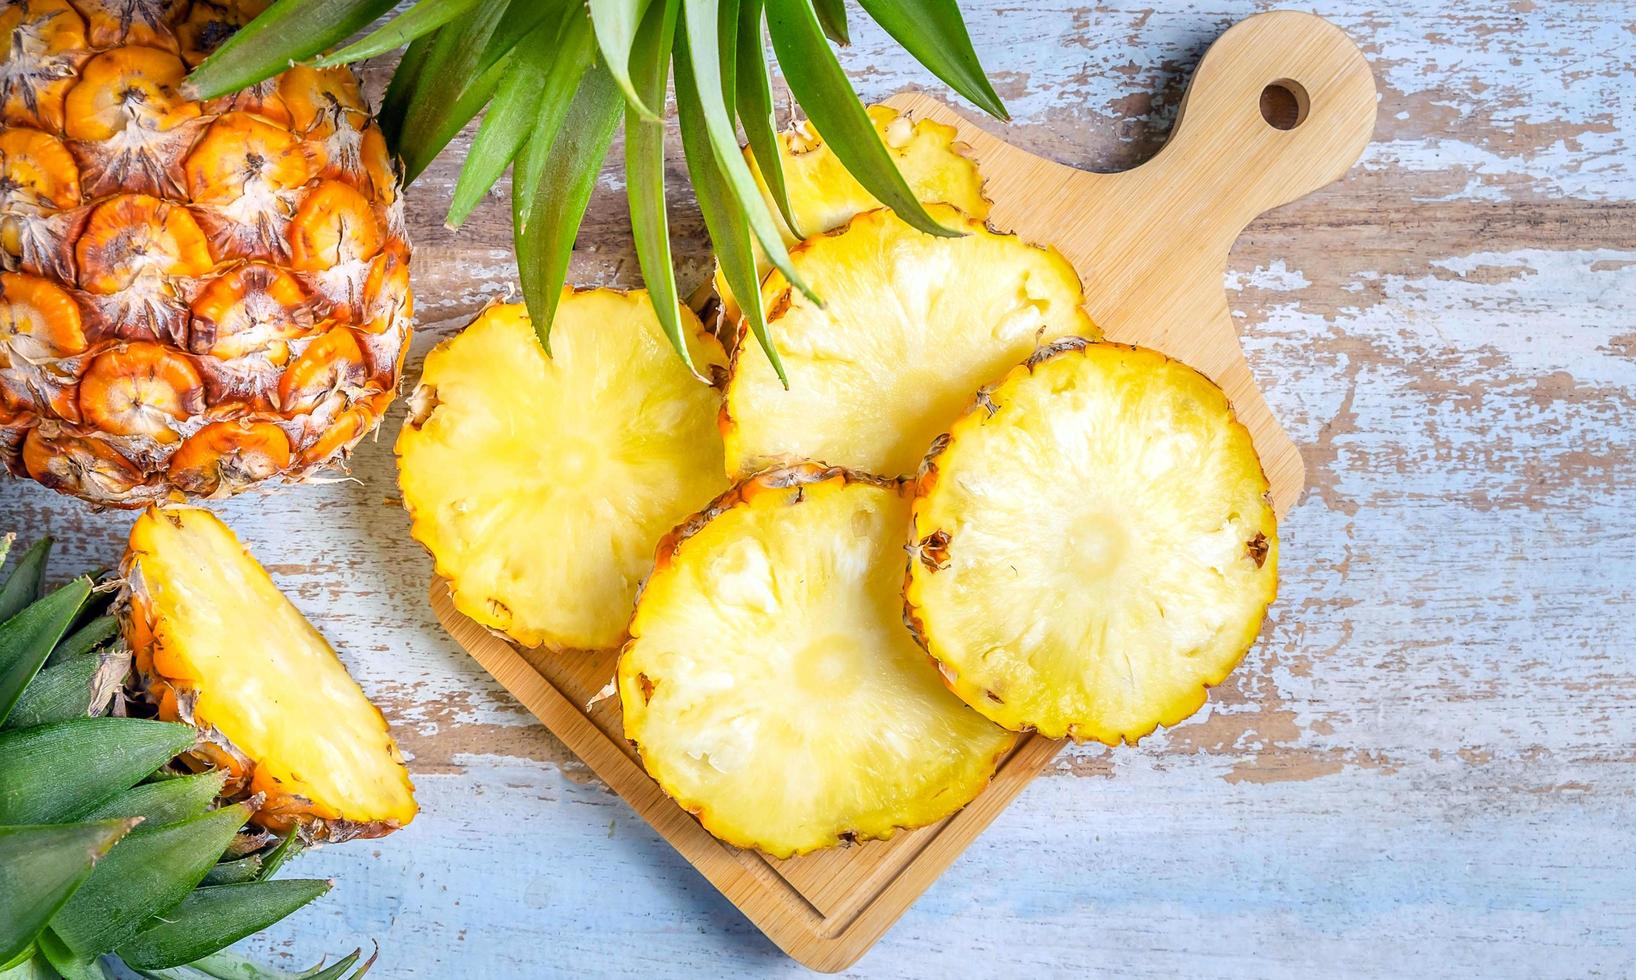 Top view of Sliced and half Pineapple and fresh pineapple fruit placed on an old wooden background photo